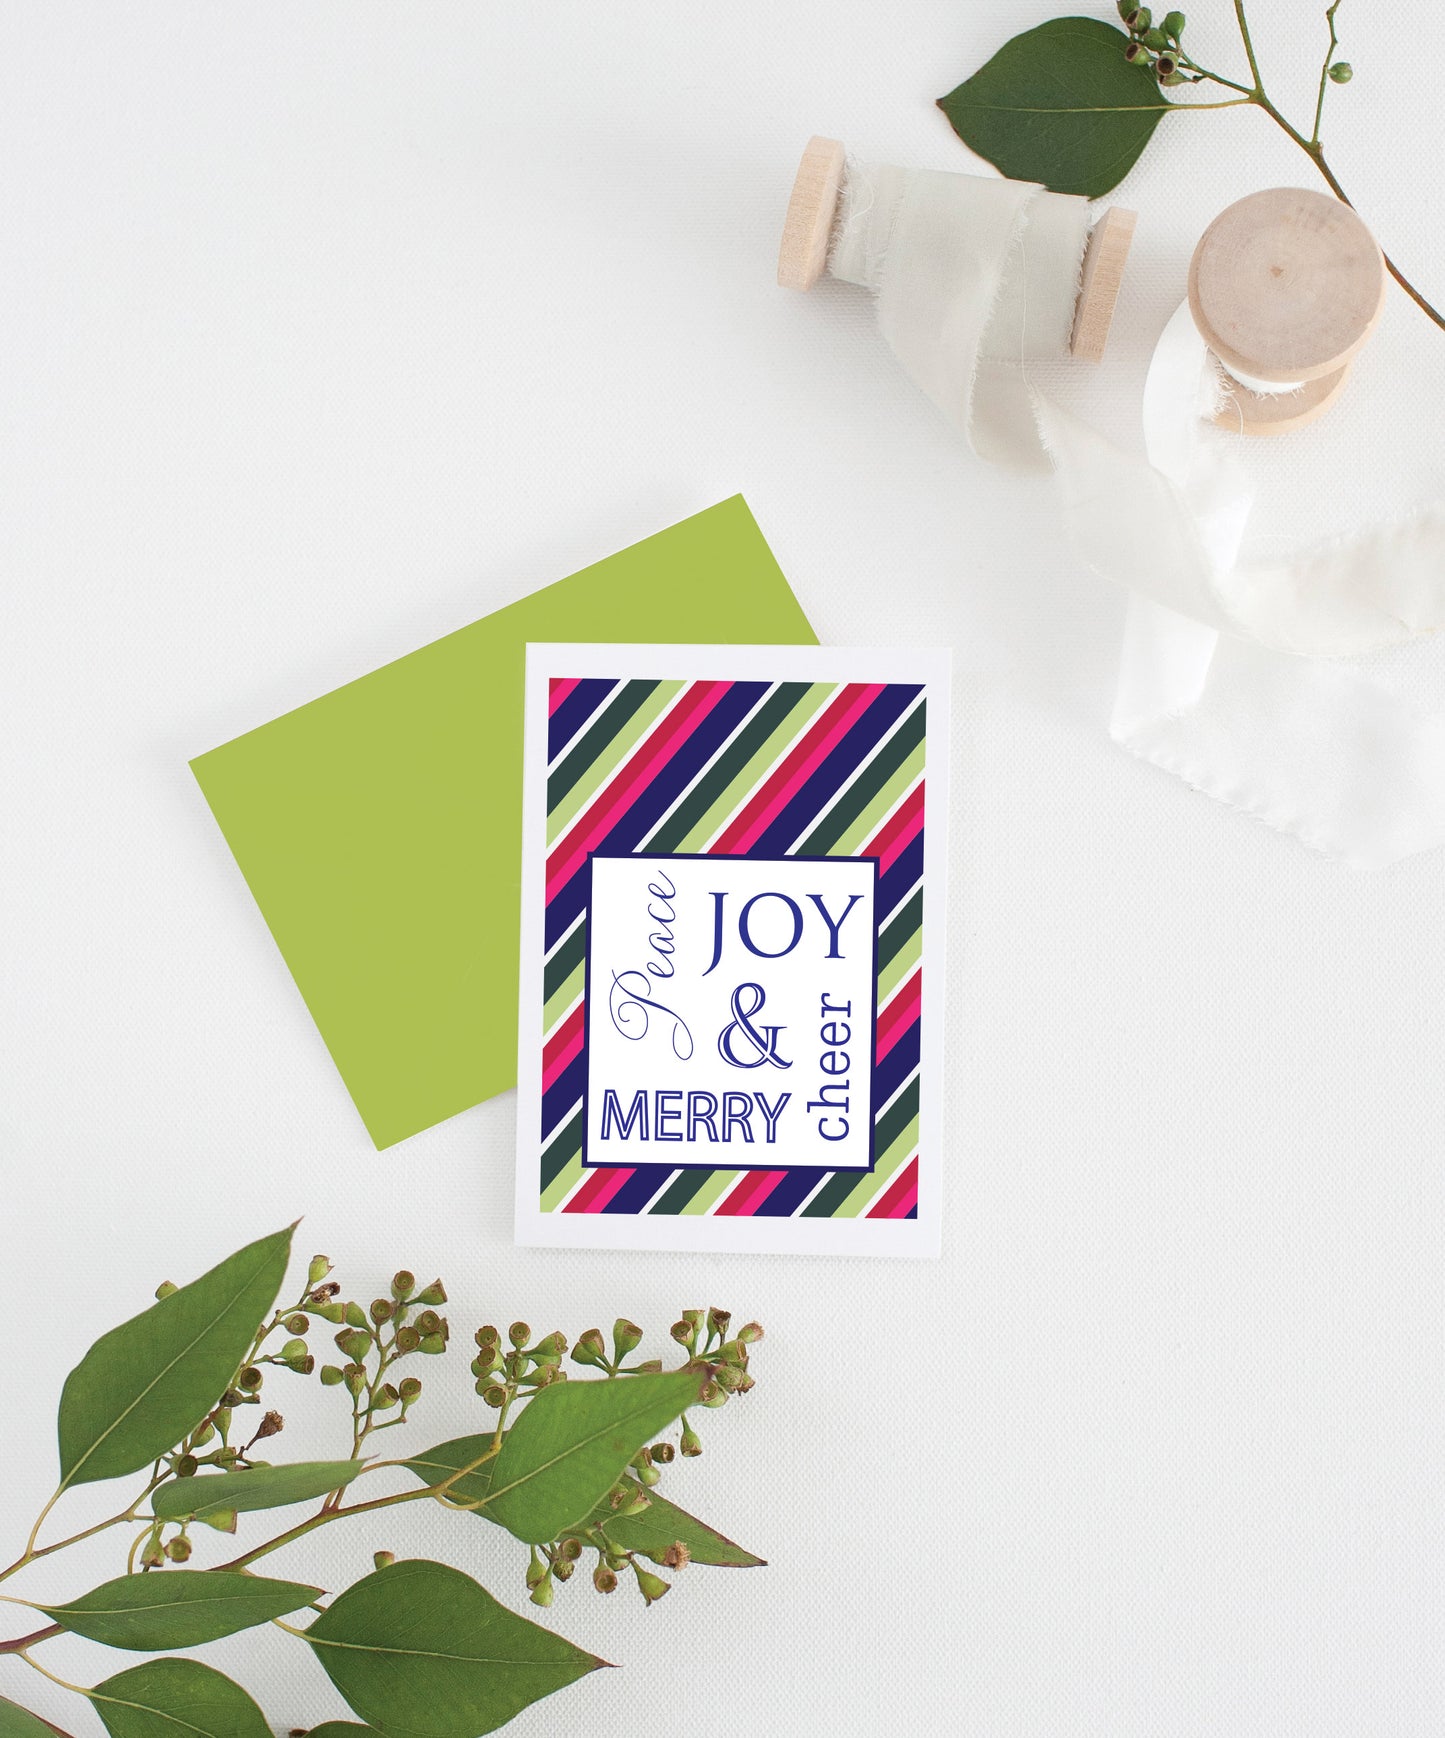 merry christmas greetings for friends | peace joy cheer merry holiday card